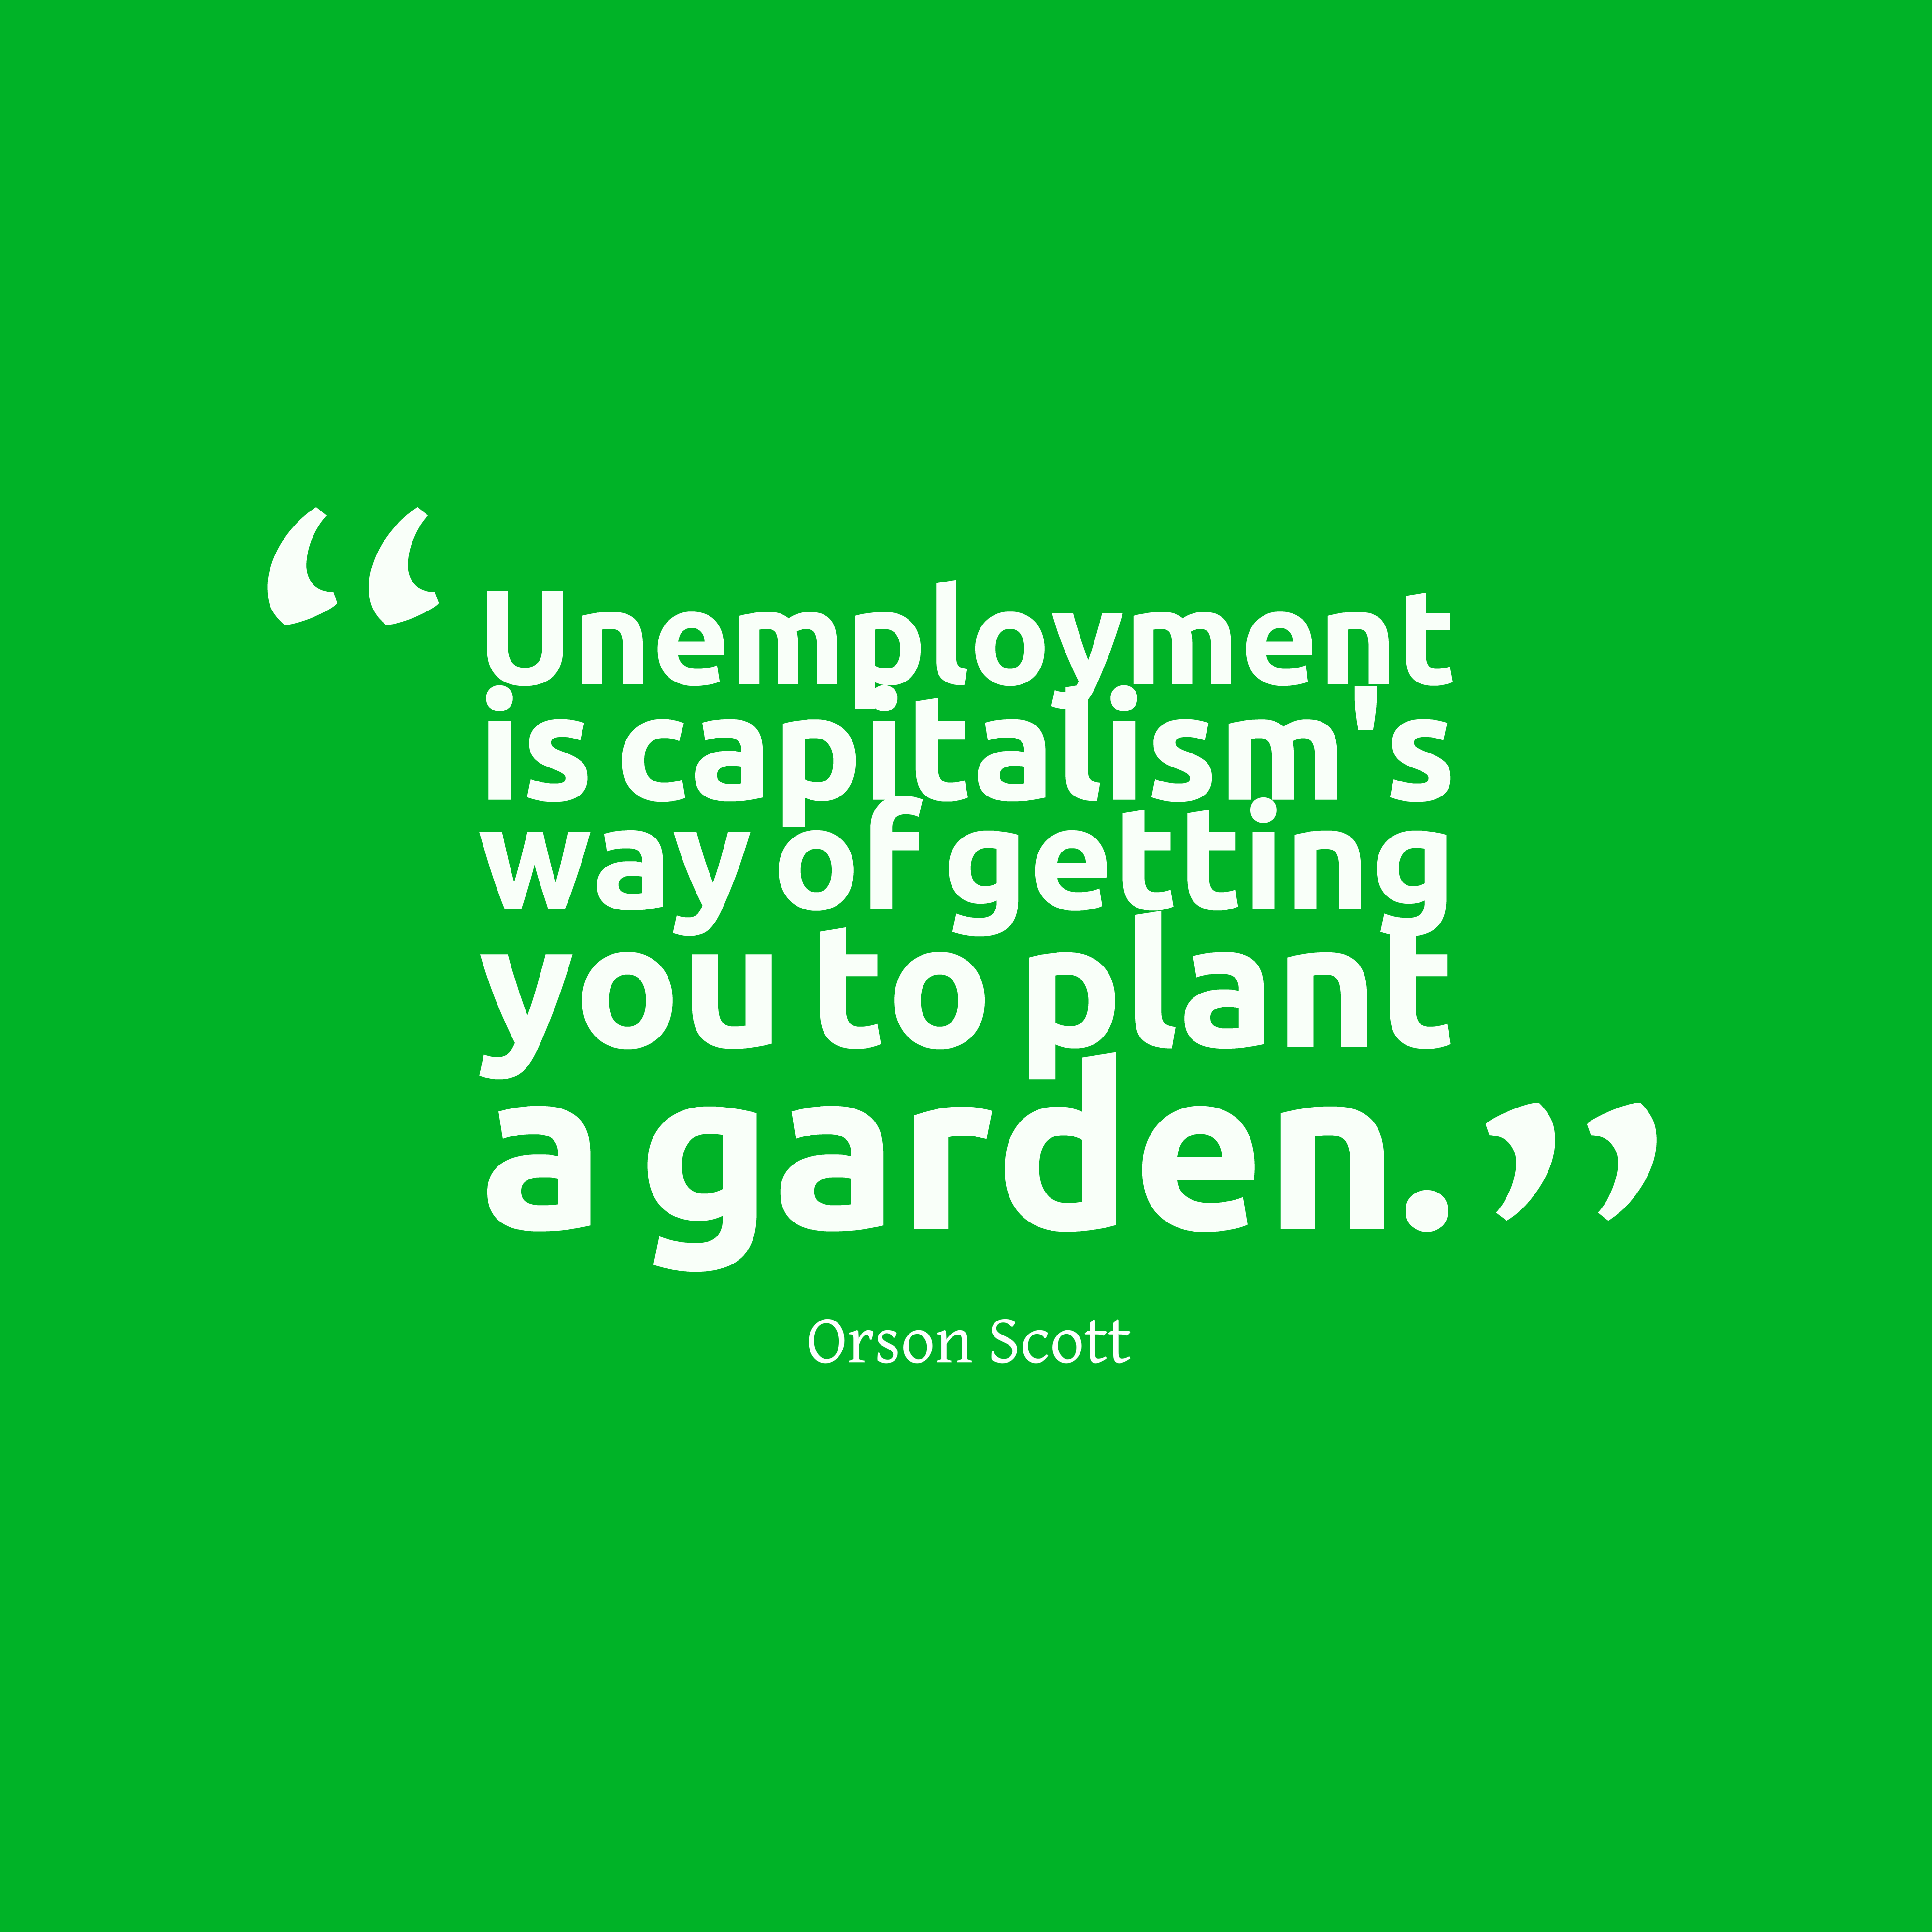 Unemployment is capitalism's way of getting you to plant a garden - Orson Scott